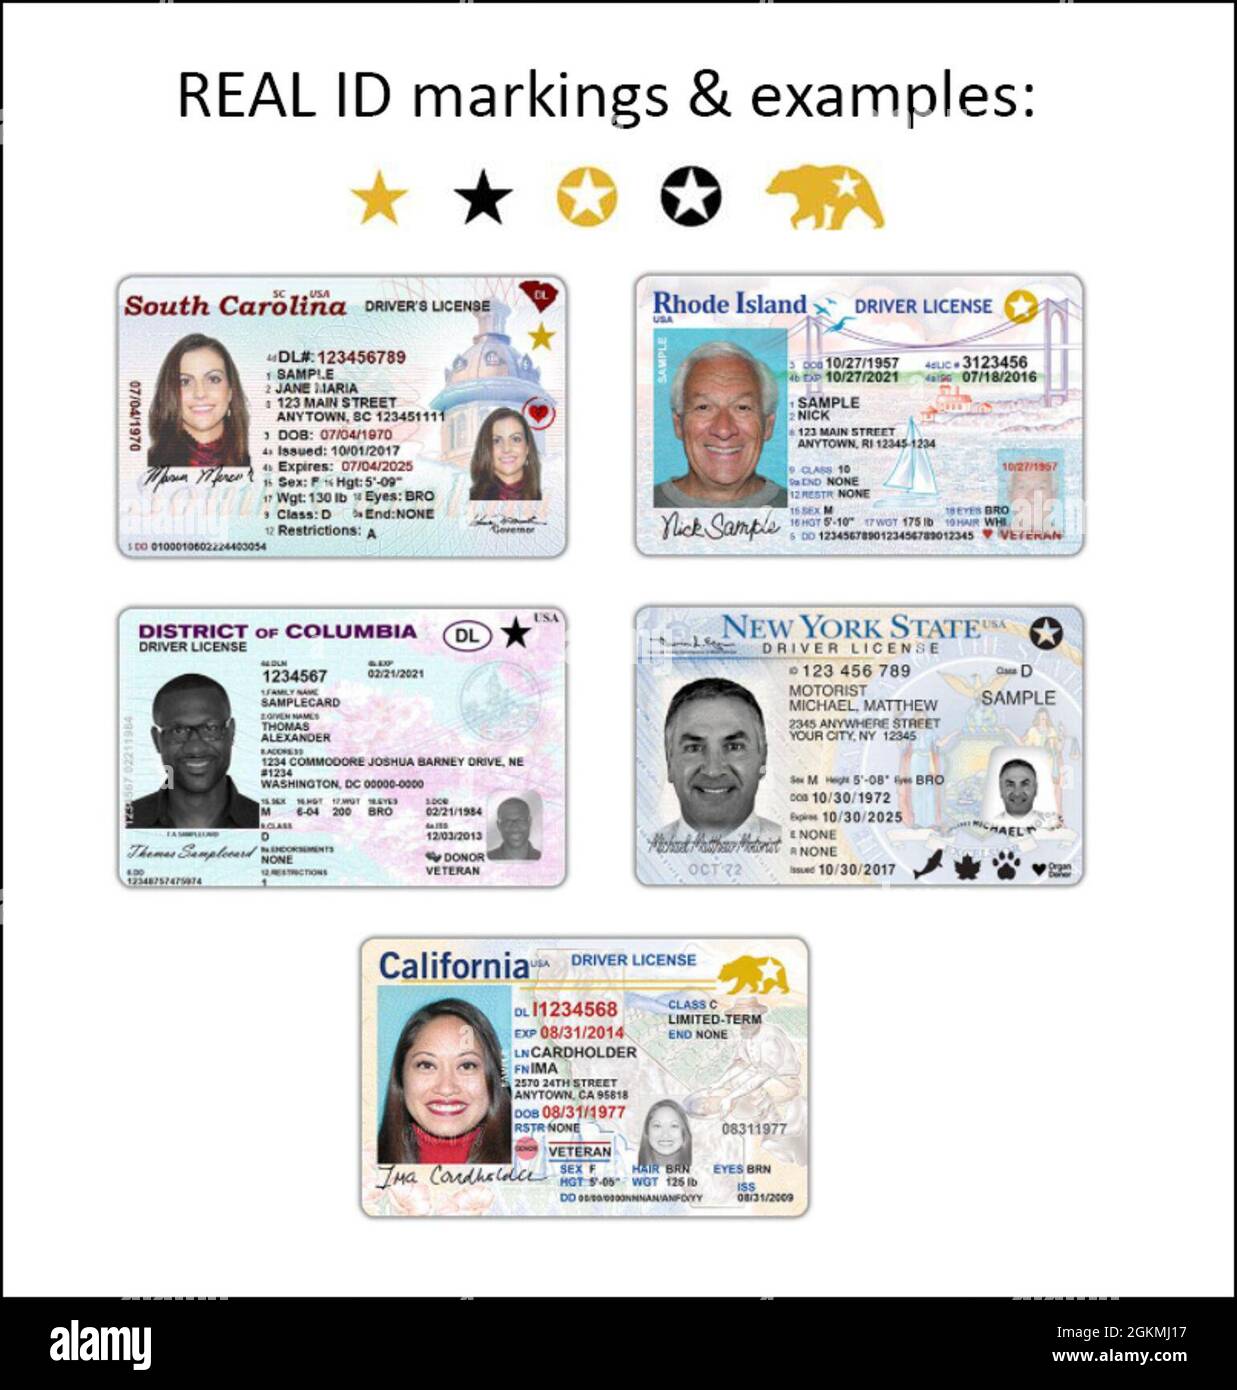 Examples of REAL IDs, which are easily recognized by definitive markings in the upper top portion of the ID cards. Stock Photo